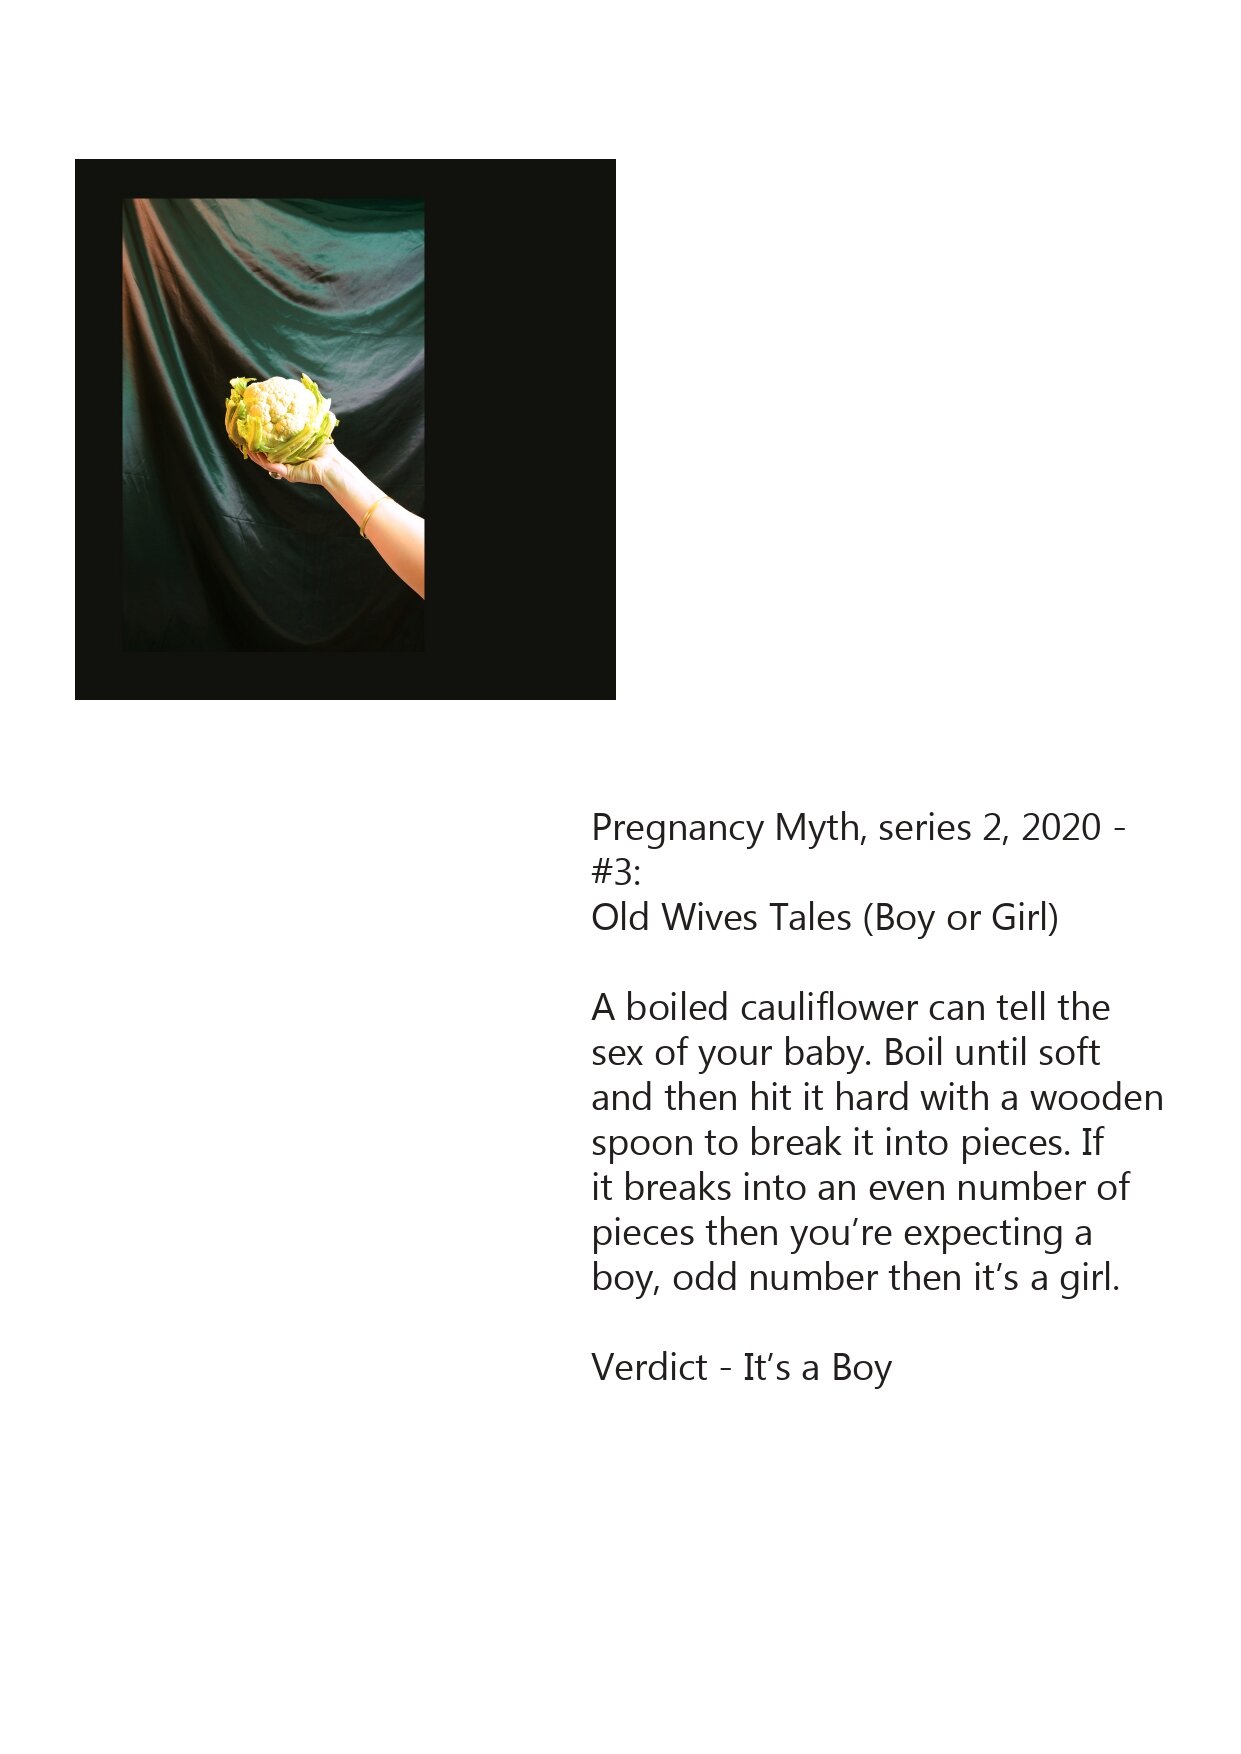 Pregnancy Myth, series 2 Old Wives Tales (Boy or Girl) — georgie white winter